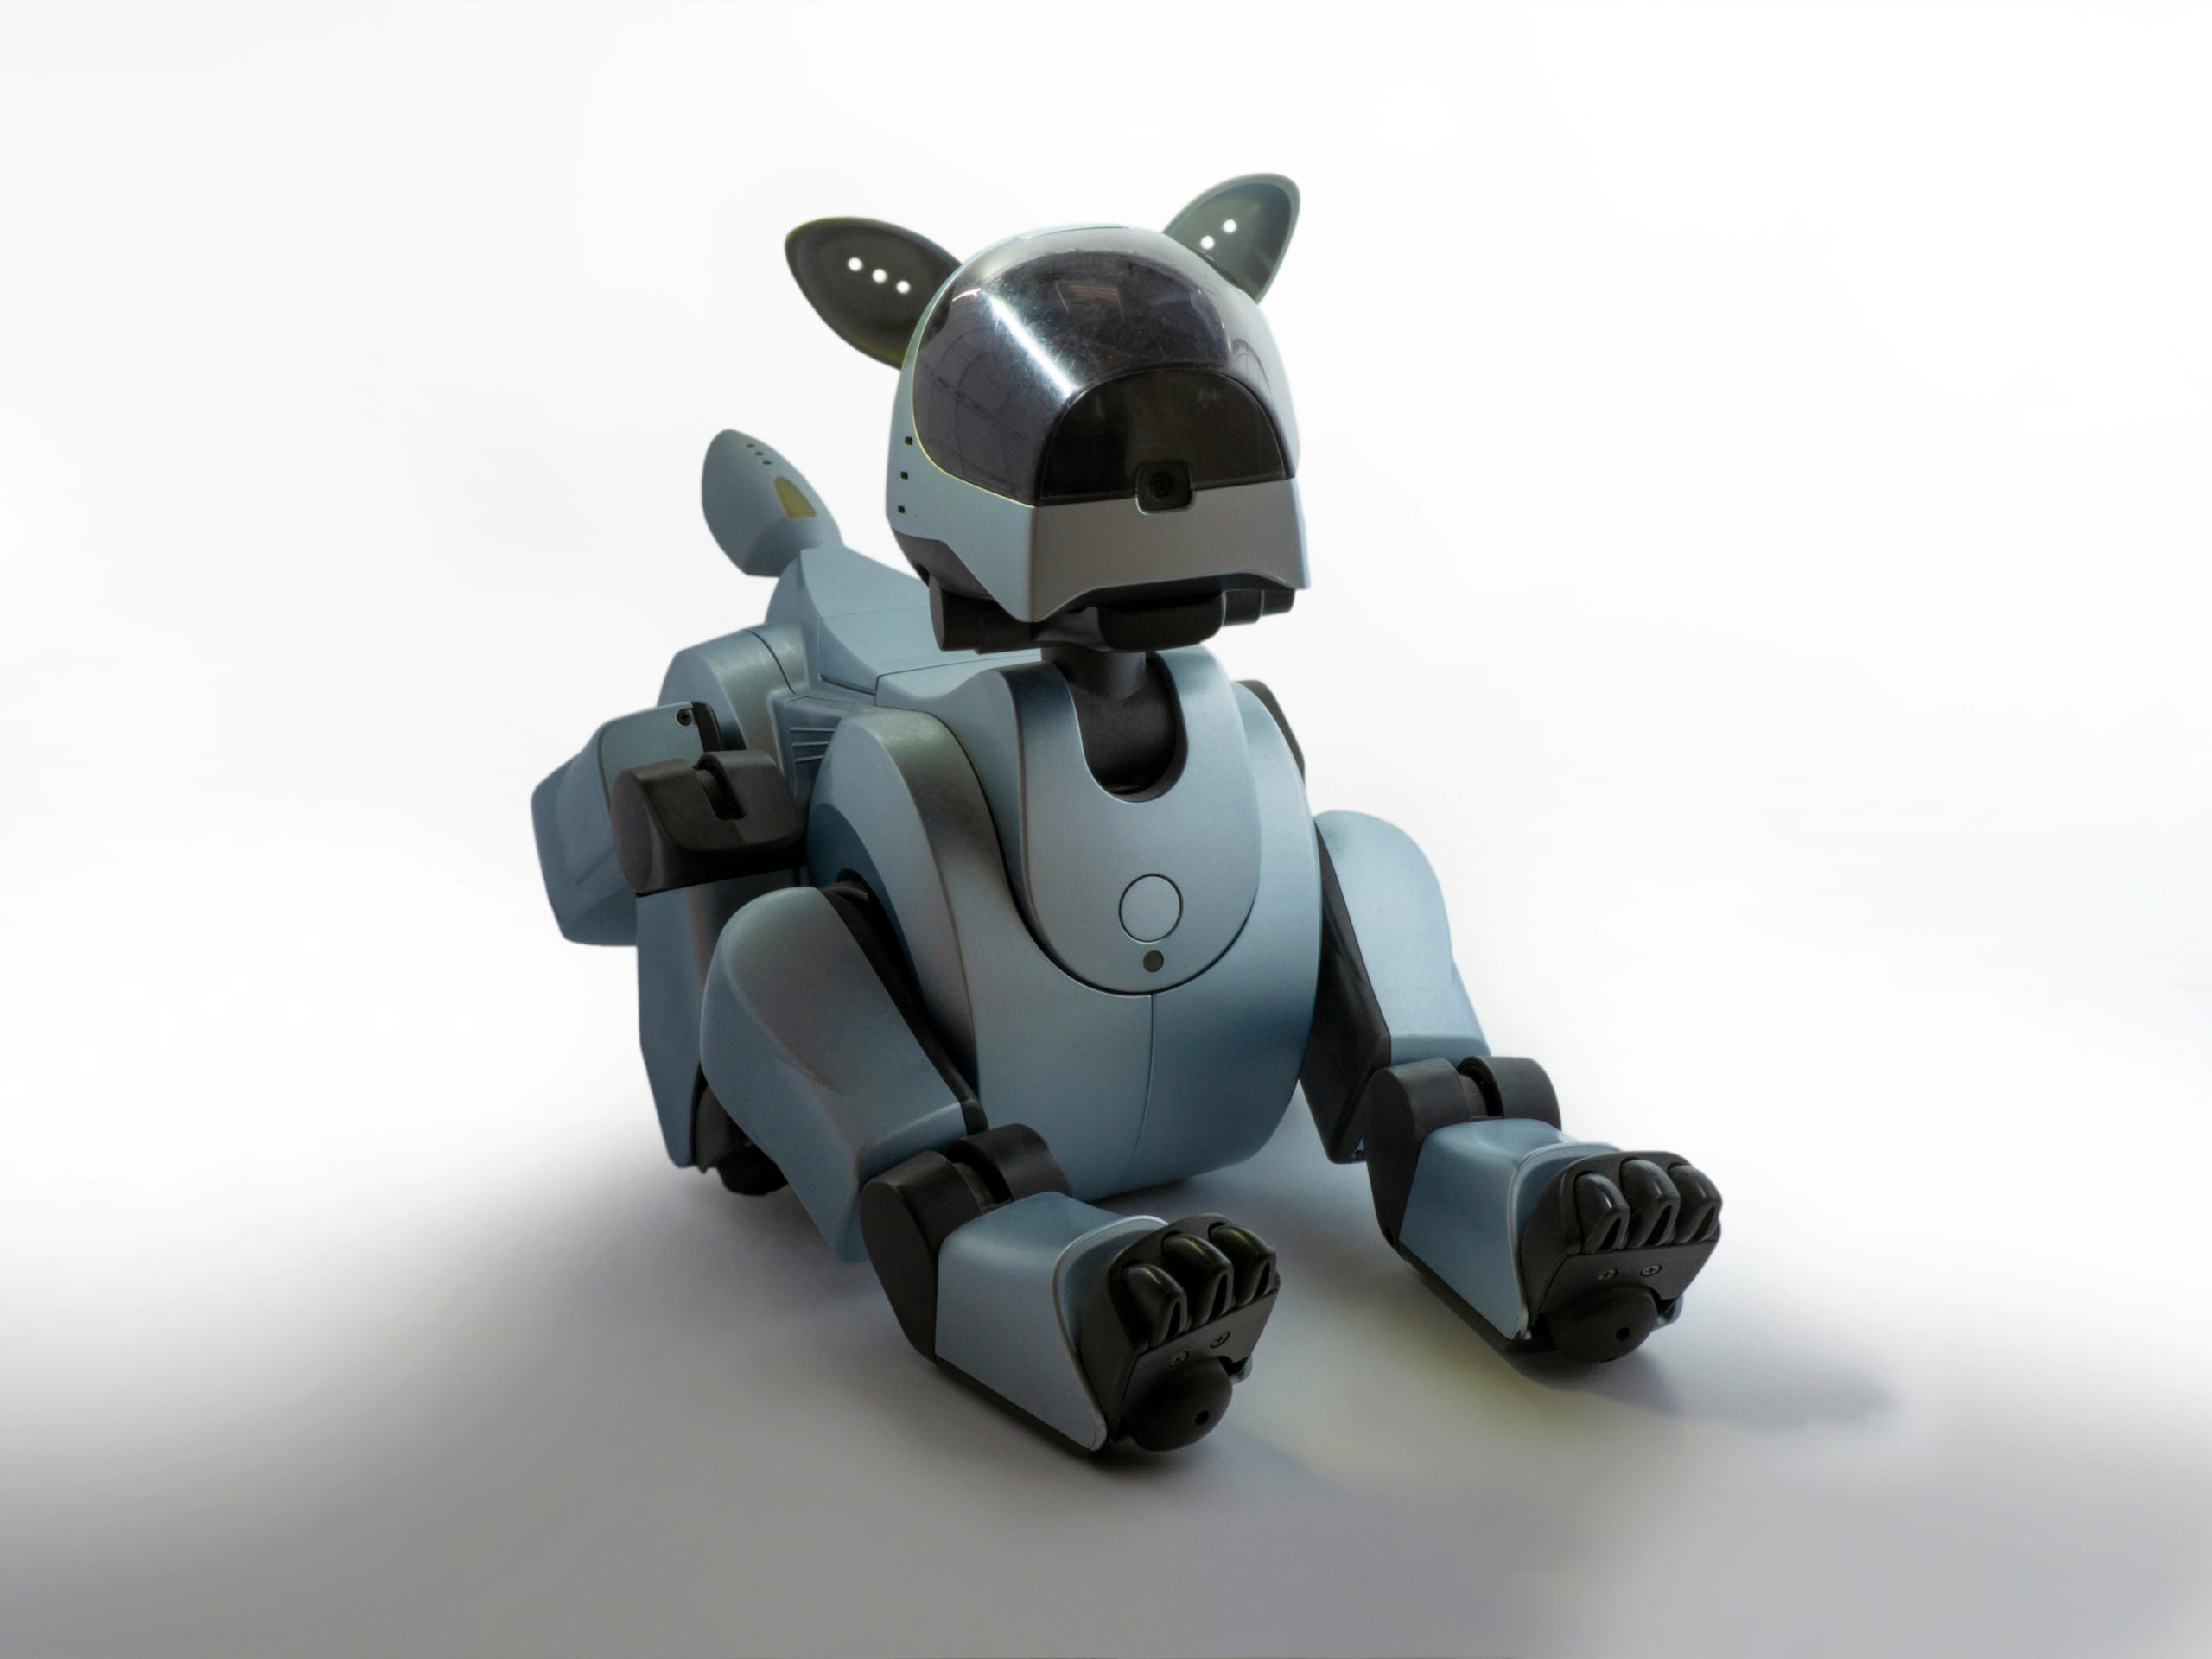 CERN releases robot-dog to inspect radiation zones and its very Black Mirror